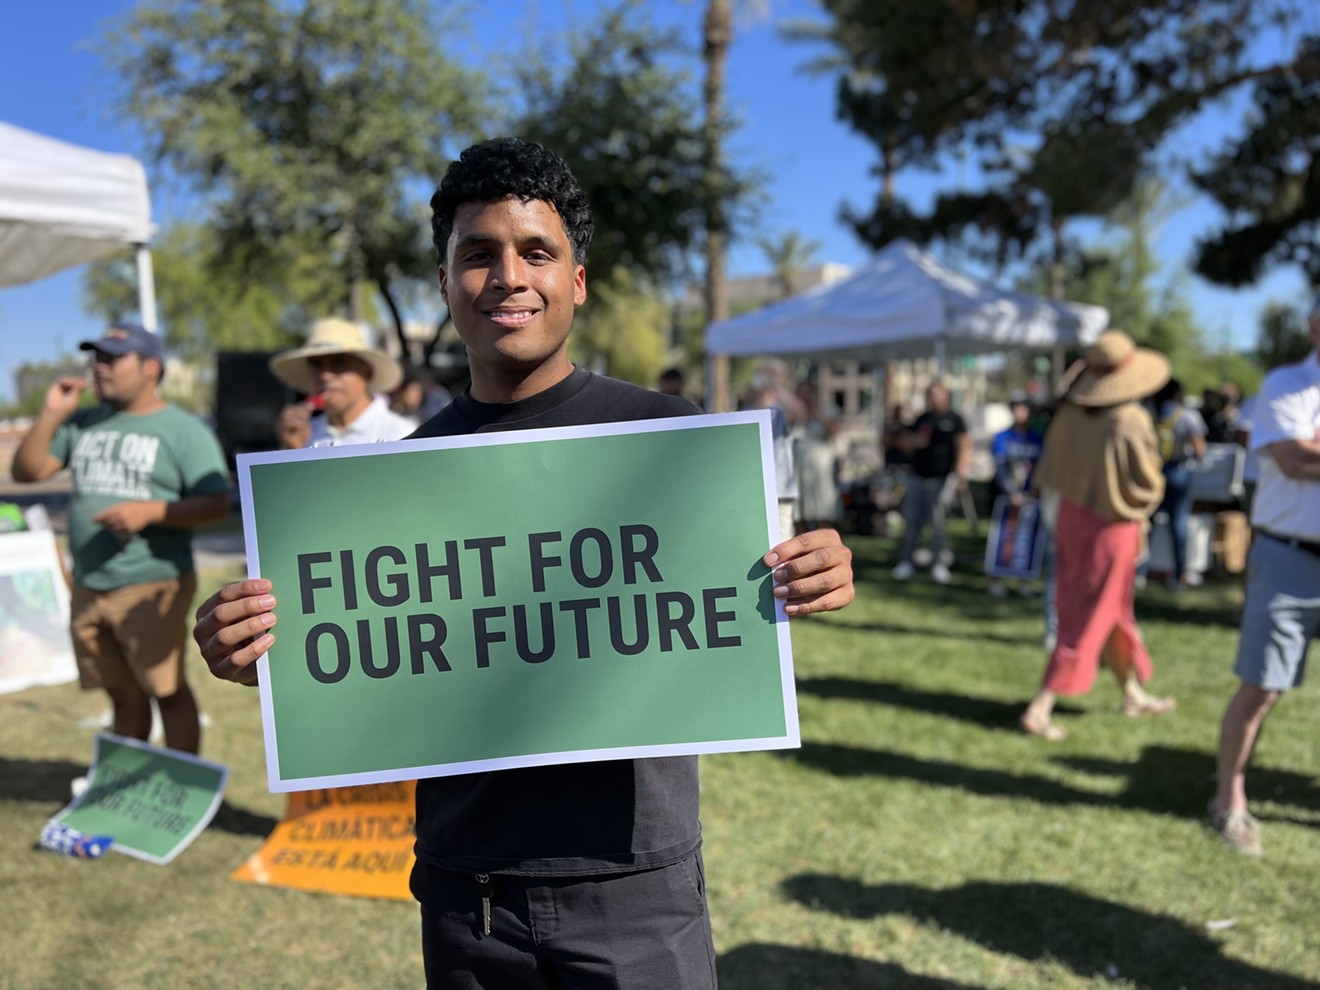 Under-30s turned out at the polls in record numbers in 2020. Now they're a driving force behind climate activism in Phoenix and beyond.